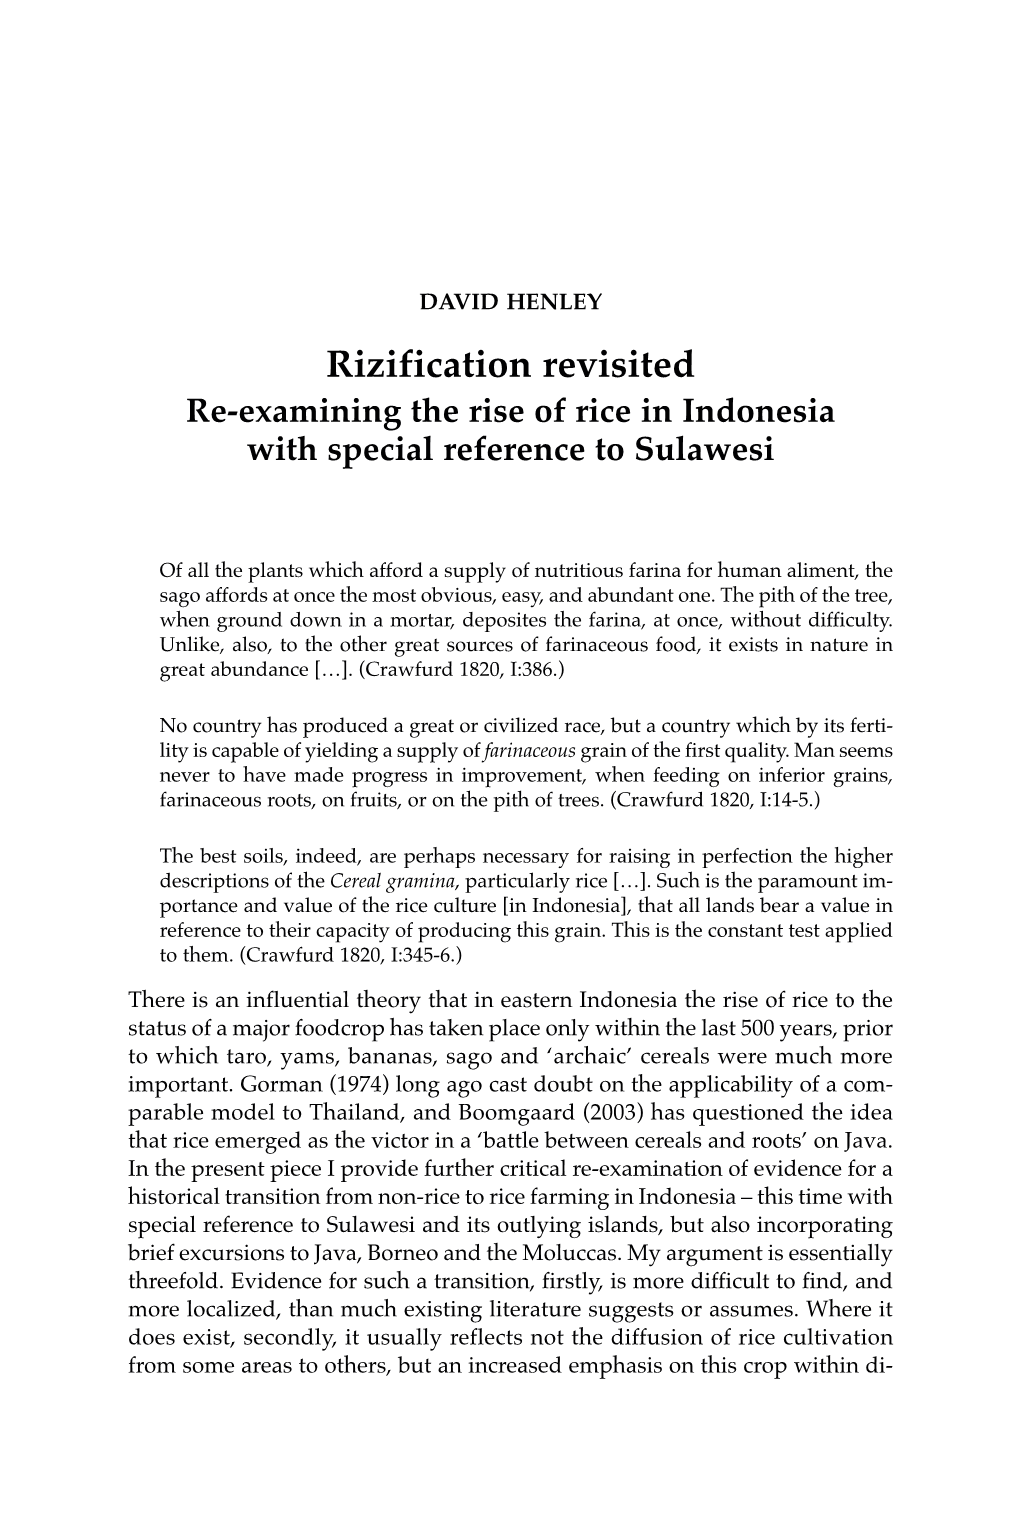 Rizification Revisited Re-Examining the Rise of Rice in Indonesia with Special Reference to Sulawesi